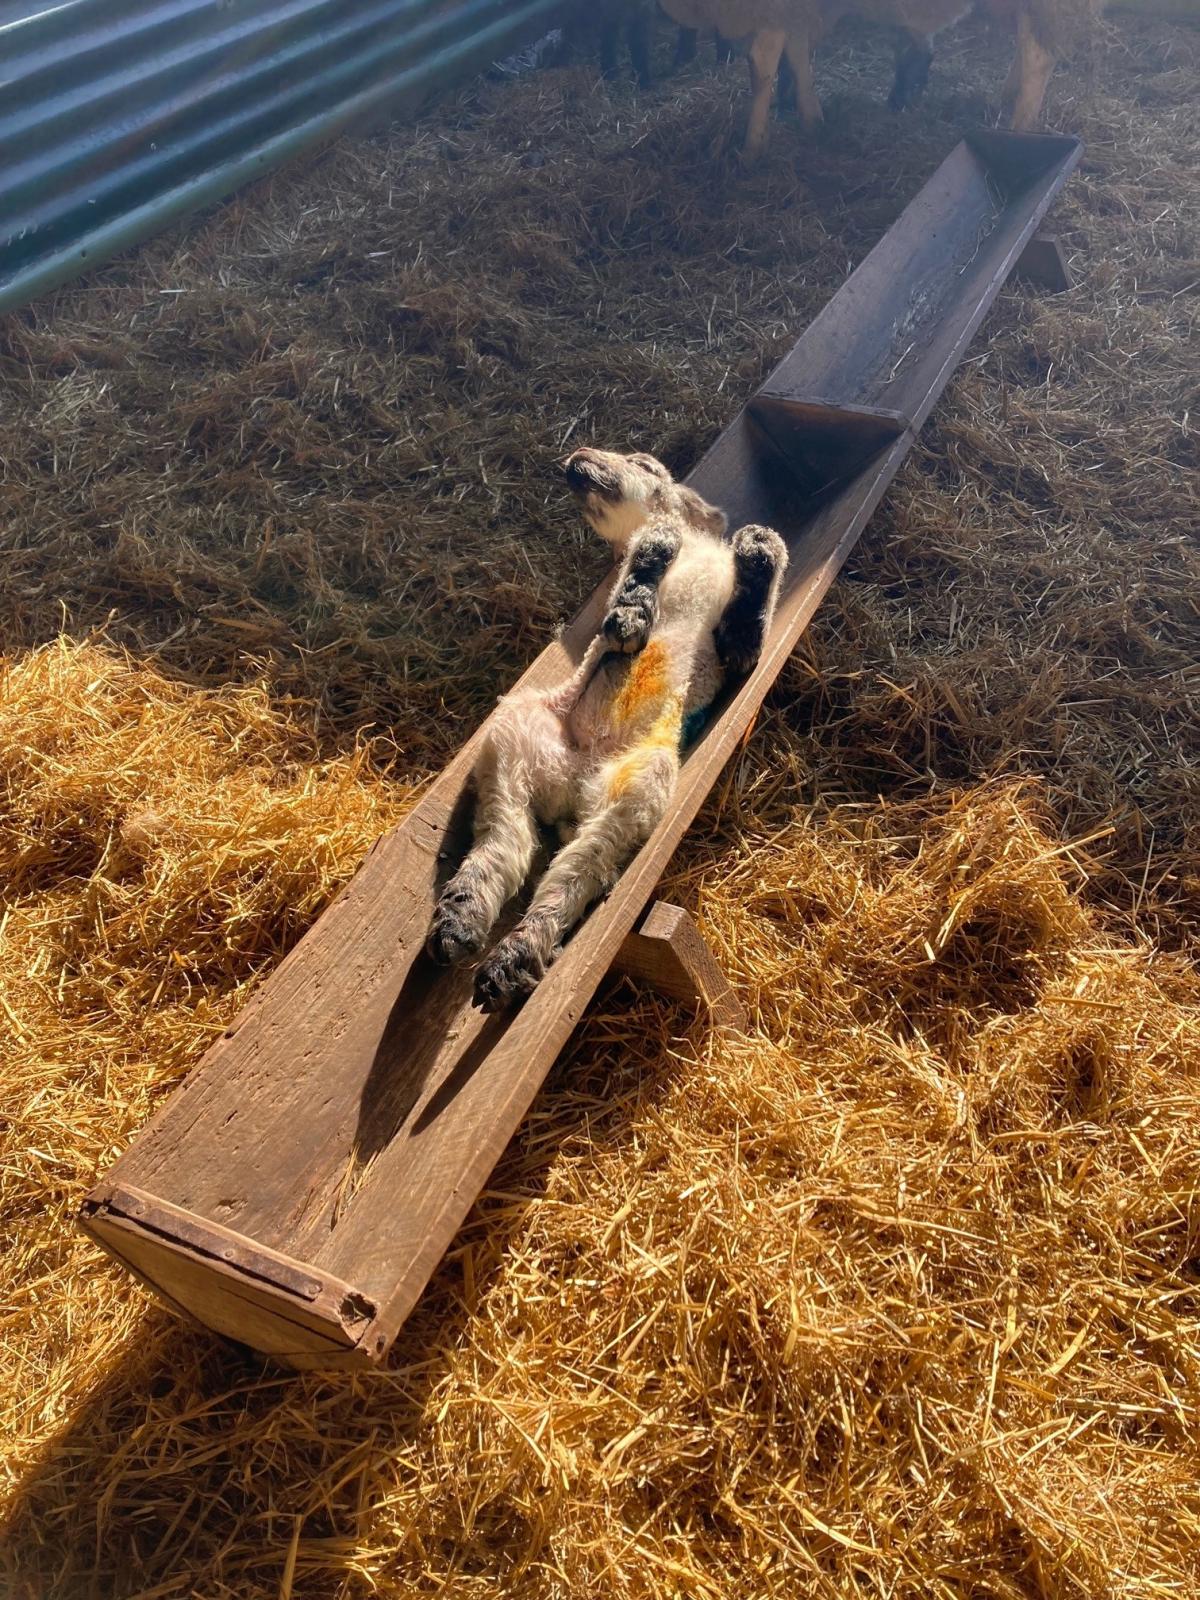 Pam Cessford - This young lamb clearly wanted 
to relax in the welcomed sunshine today